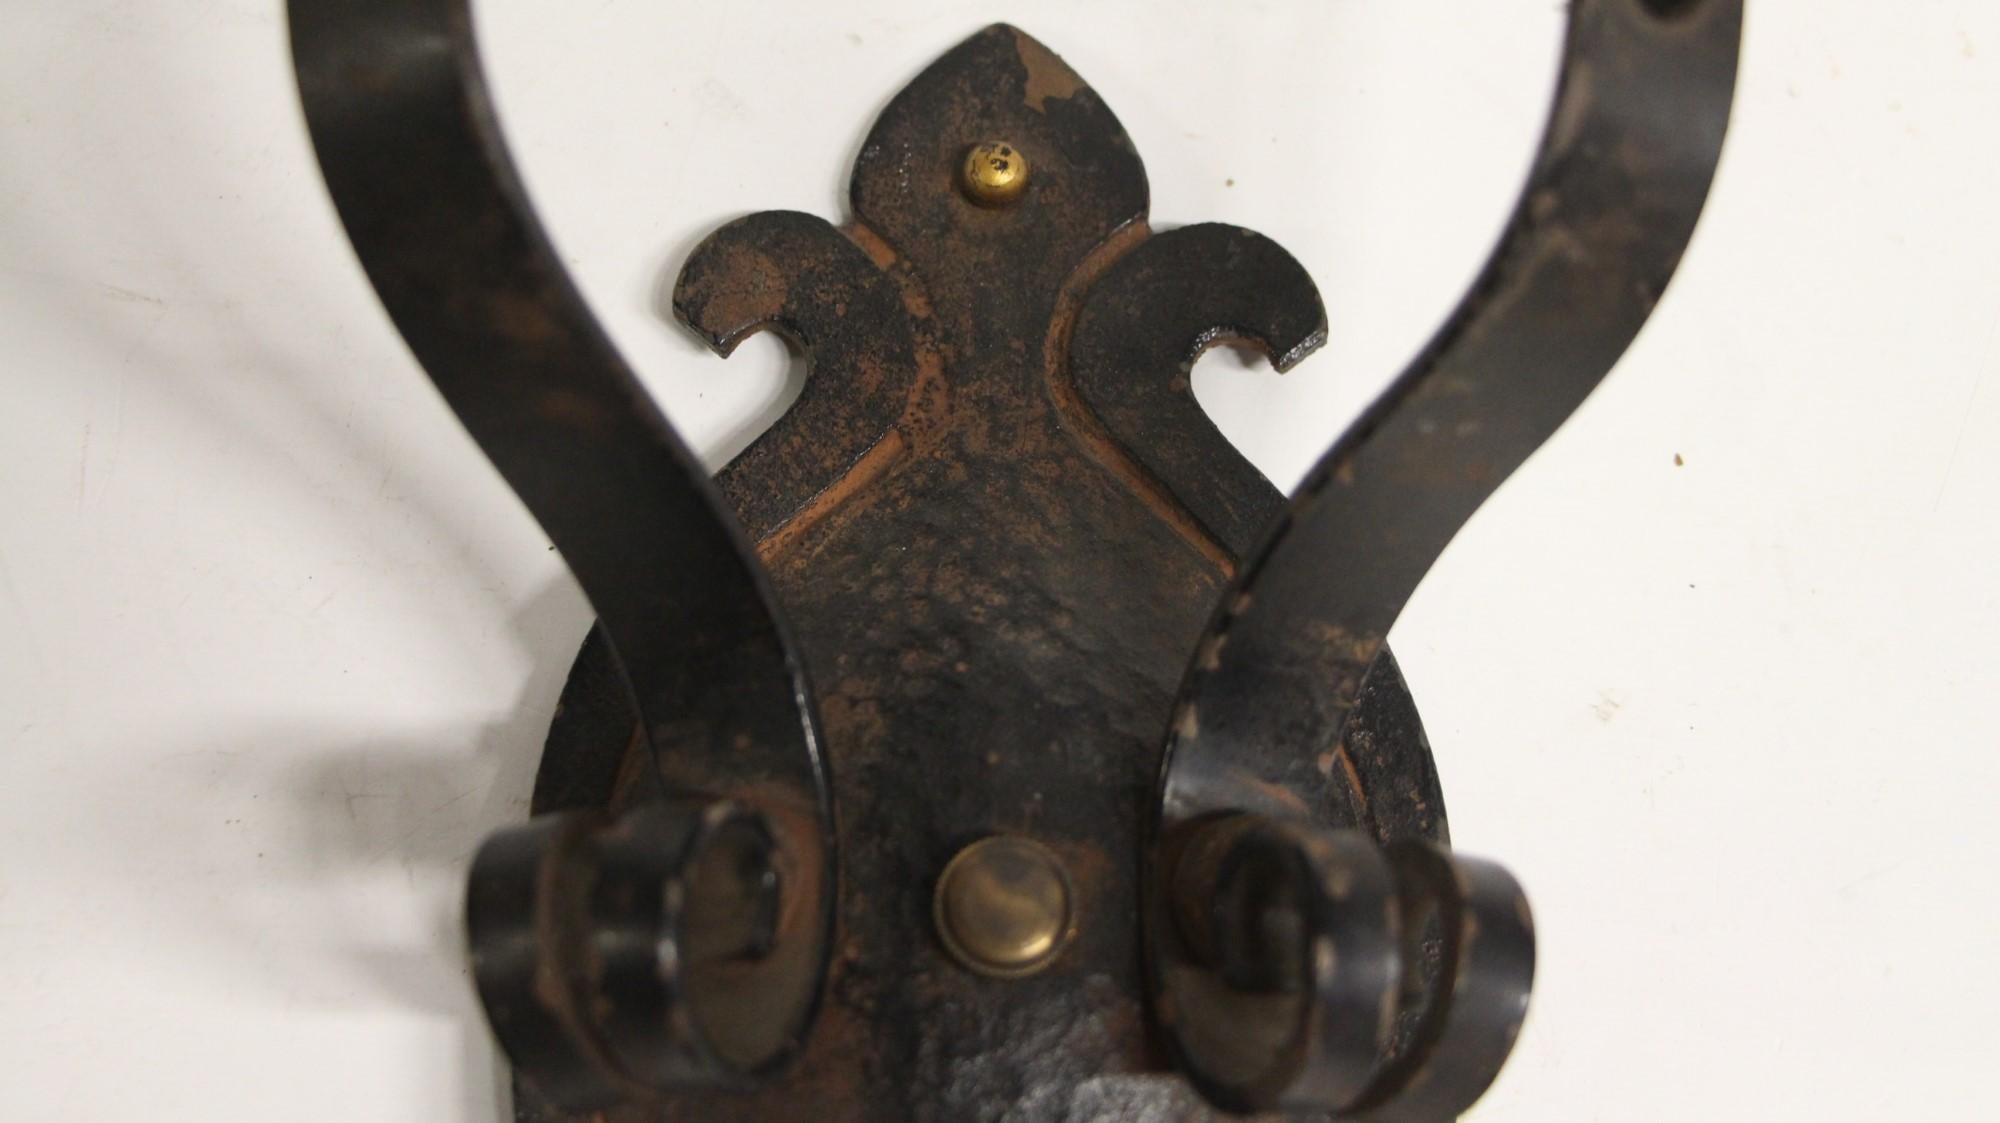 1910s wrought iron floral Arts & Crafts style hand hammered sconce. Newly cleaned and rewired. This can be seen at our 400 Gilligan St location in Scranton. PA.